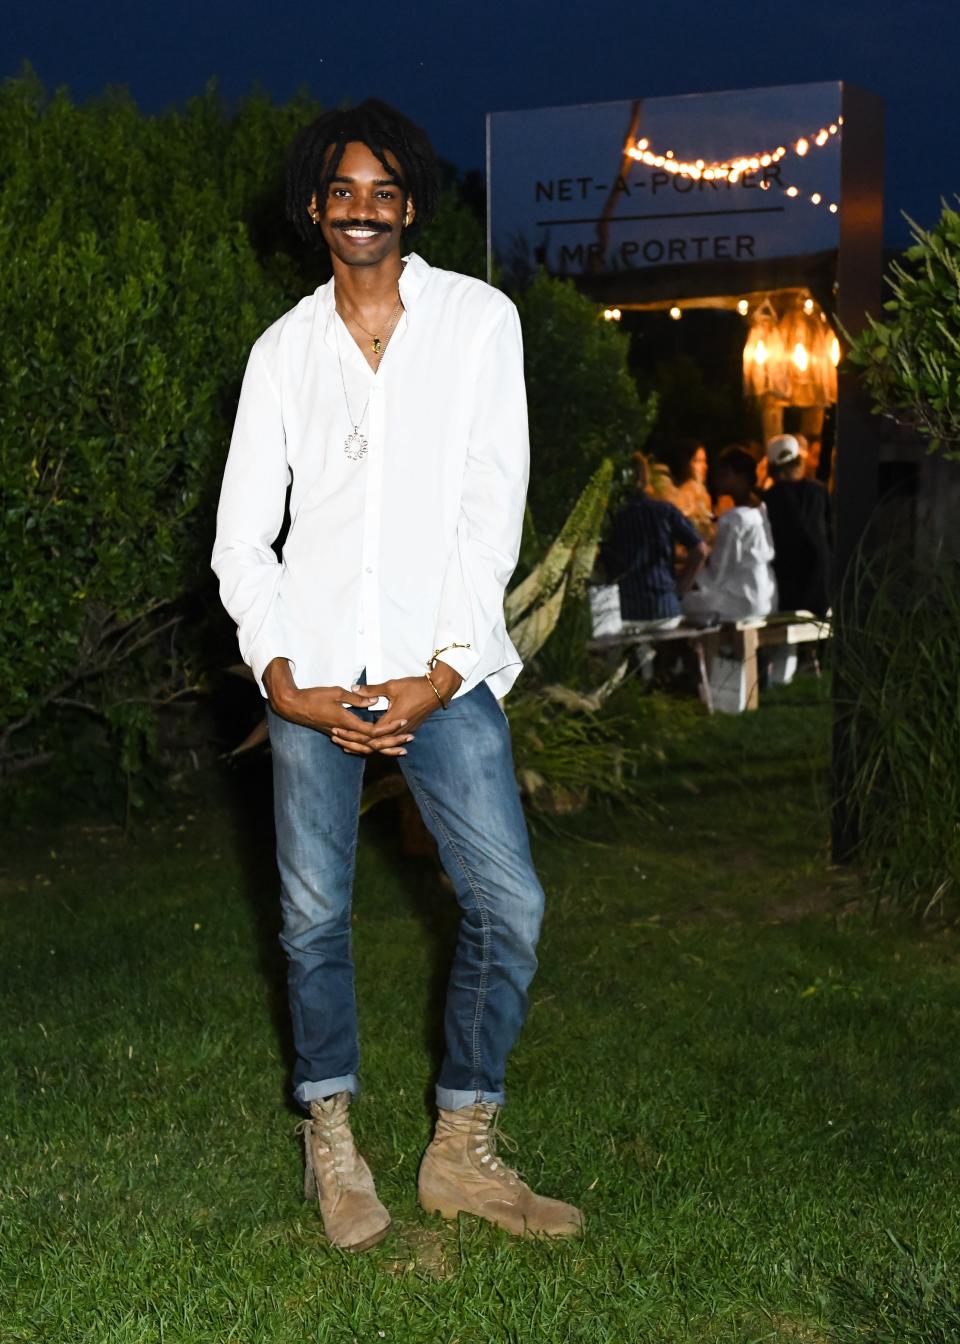 Designers, Editors, and More Made Their Way Out to Montauk for Net-a-Porter and Mr Porter’s Family-Style Dinner